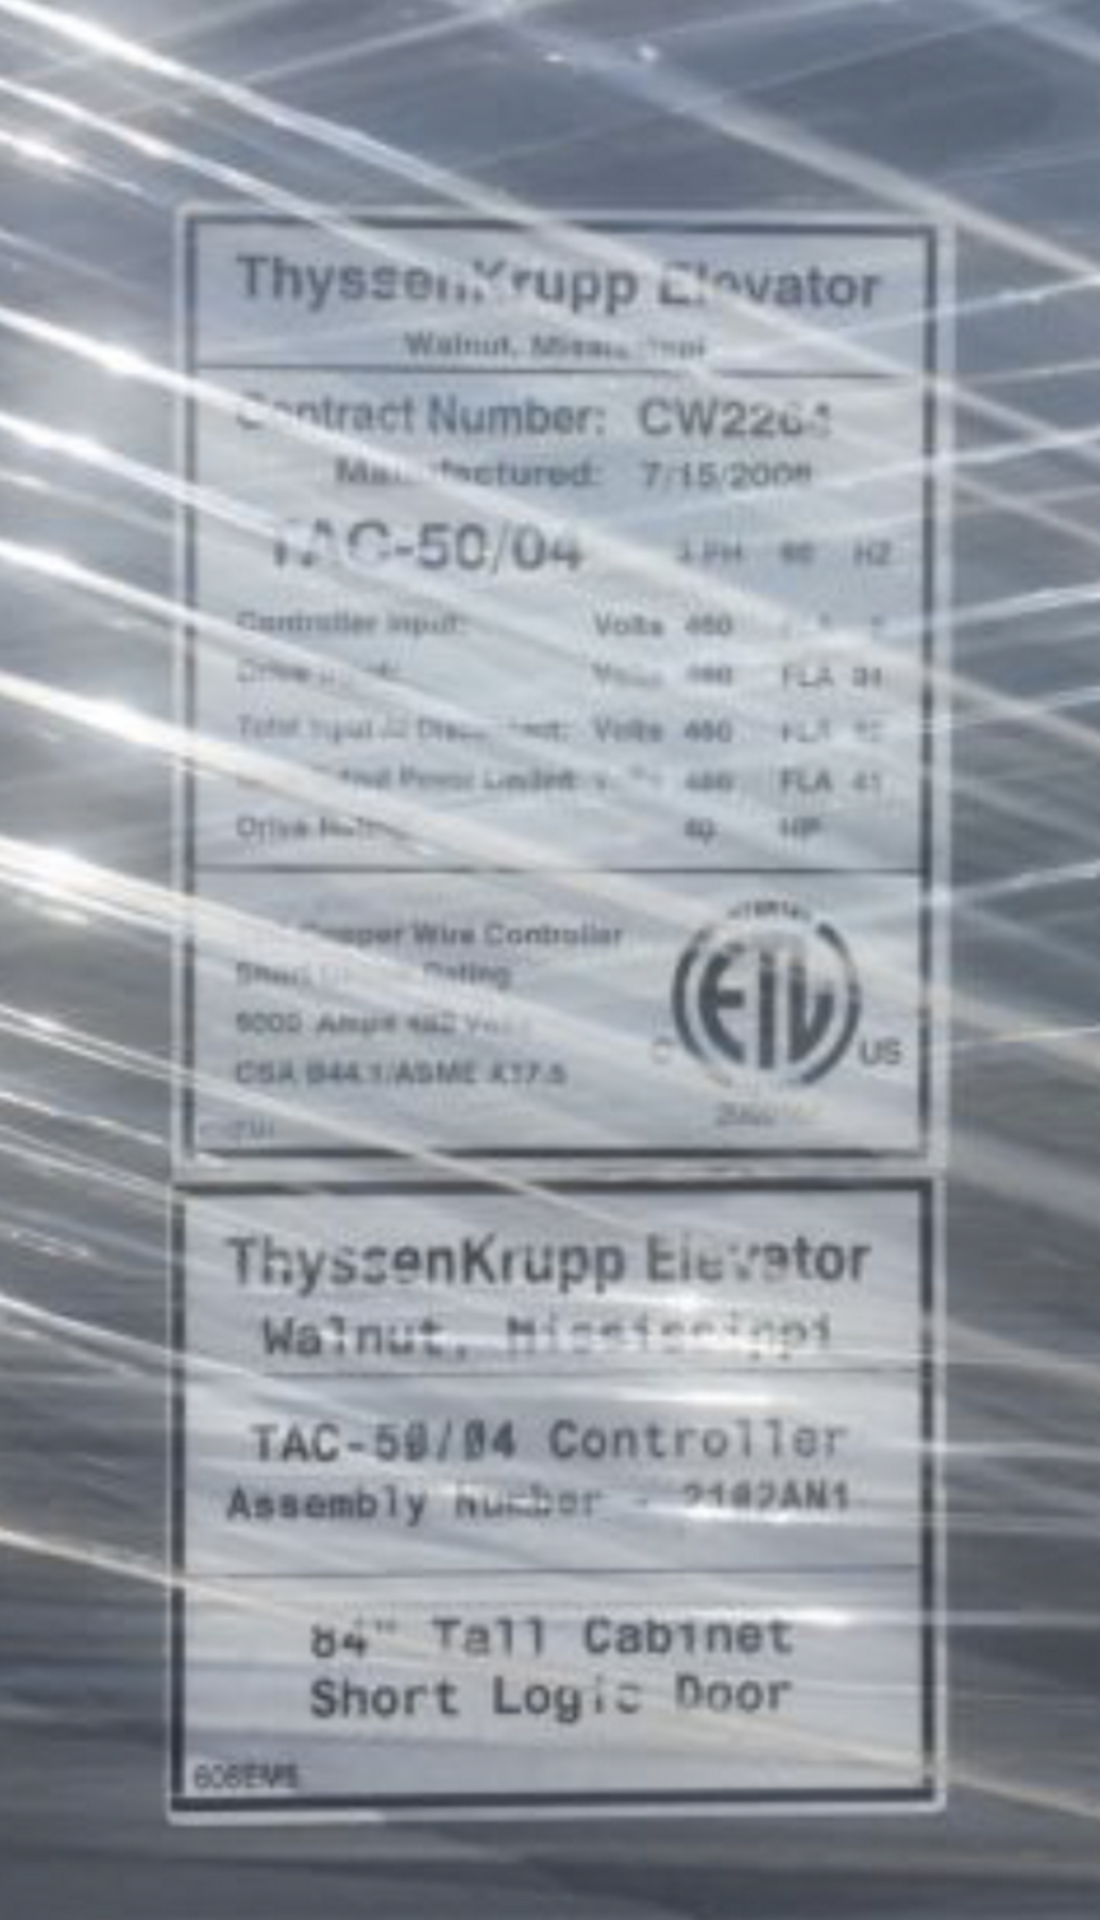 ThyssenKrupp Elevator TAC 50-04 Brand New Controller/Selector Module $55,000 84"   This item is - Image 5 of 6